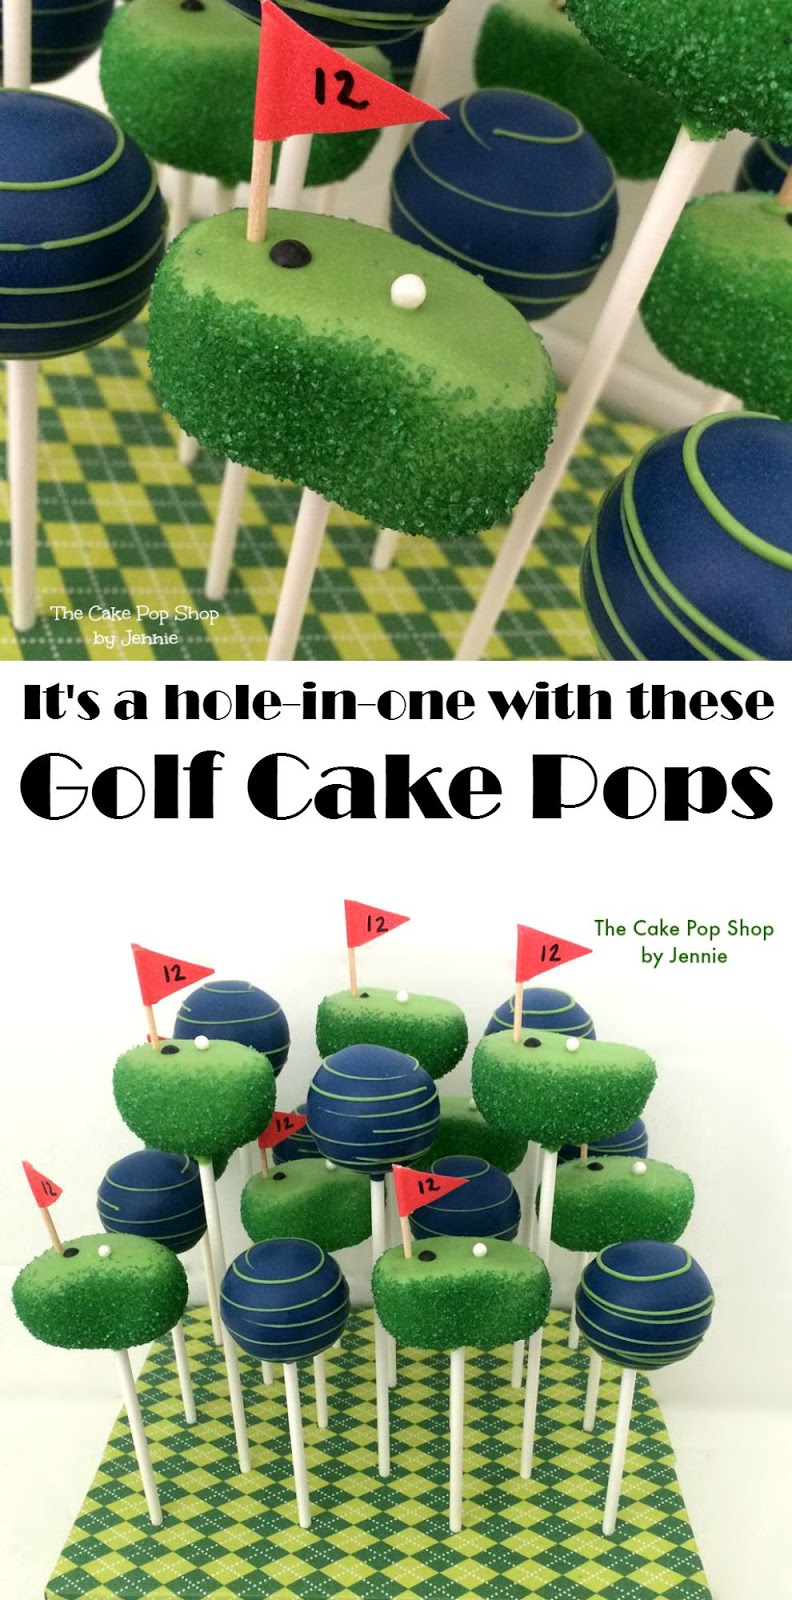 Your party will be a "hole in one" with these fun Golf Cake Pops. Learn how you can make them at home with a full tutorial and video. 